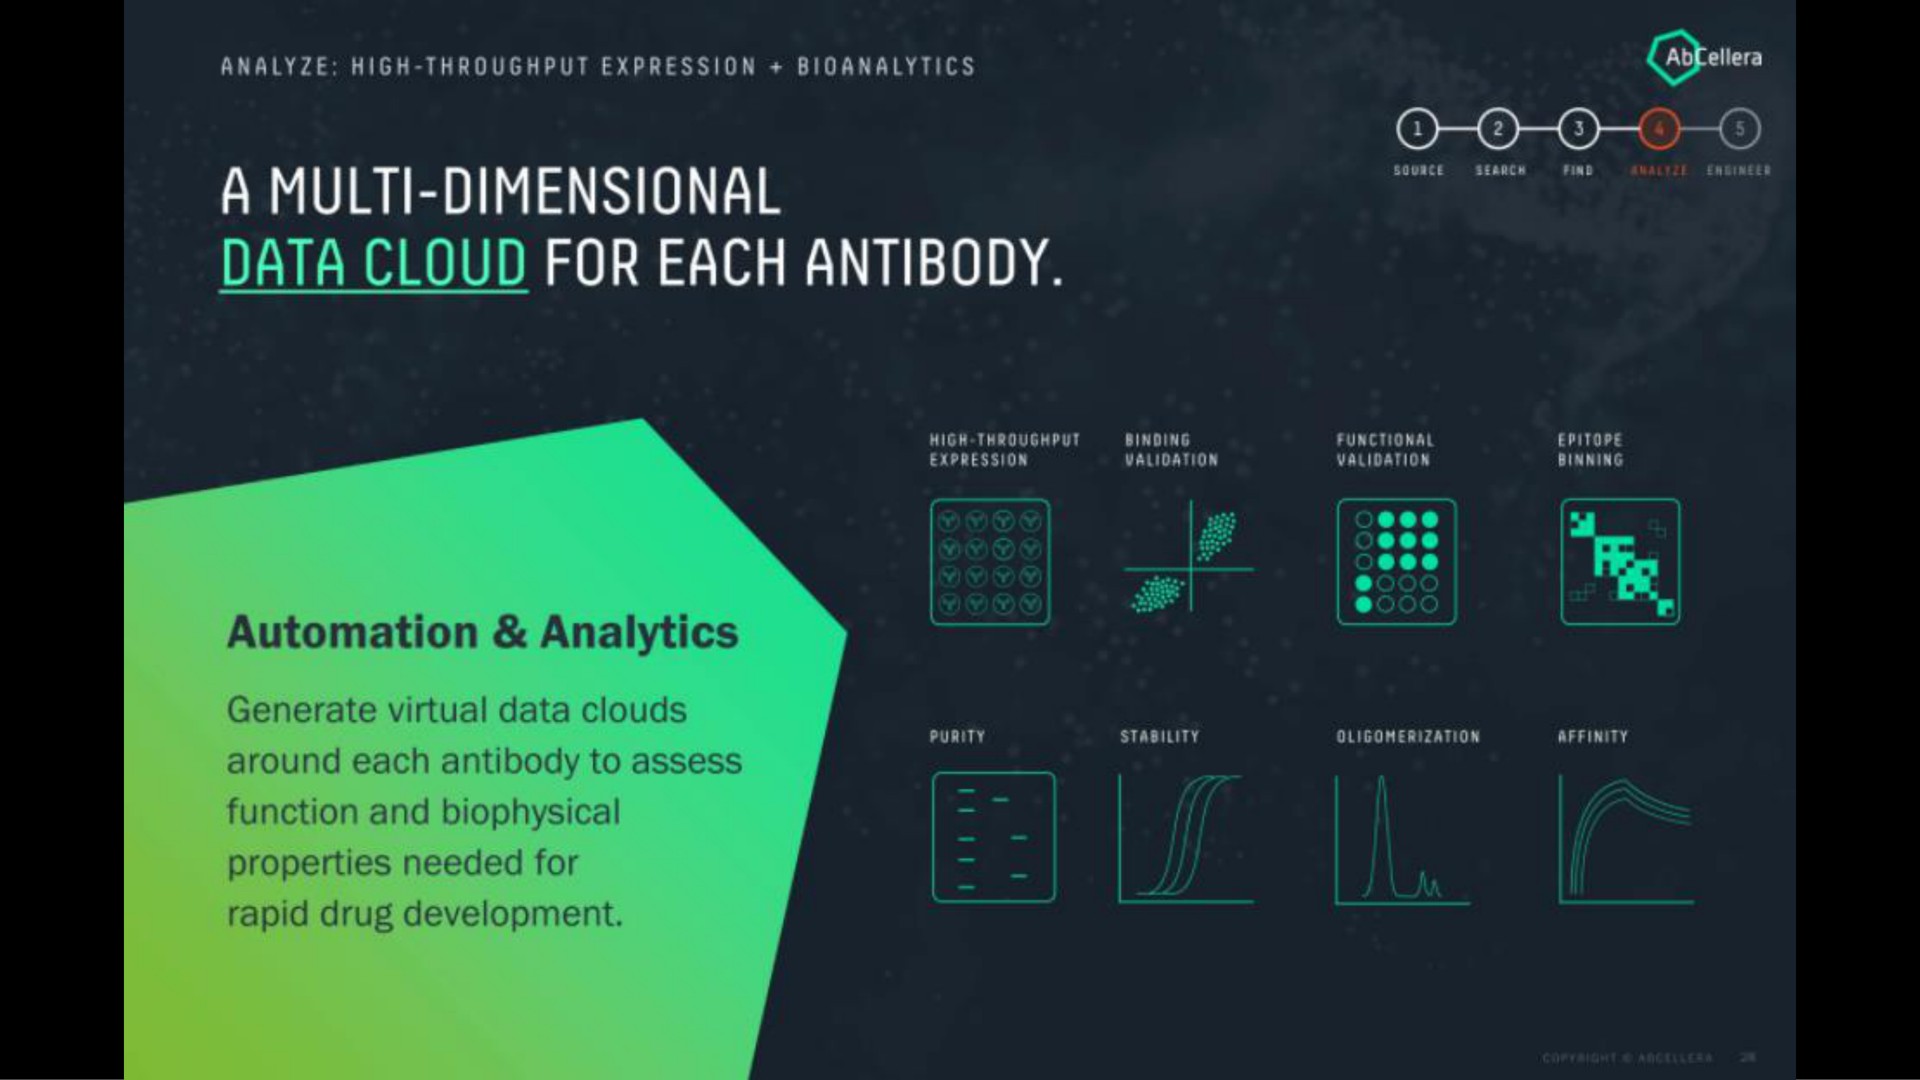 ora ase a dimensional data cloud for each antibody cro high throughput binding expression a earth i tee validation a tie a a i analytics a generate virtual data clouds around each antibody to assess function and biophysical properties needed for rapid drug development tae poe affinity | AbCellera